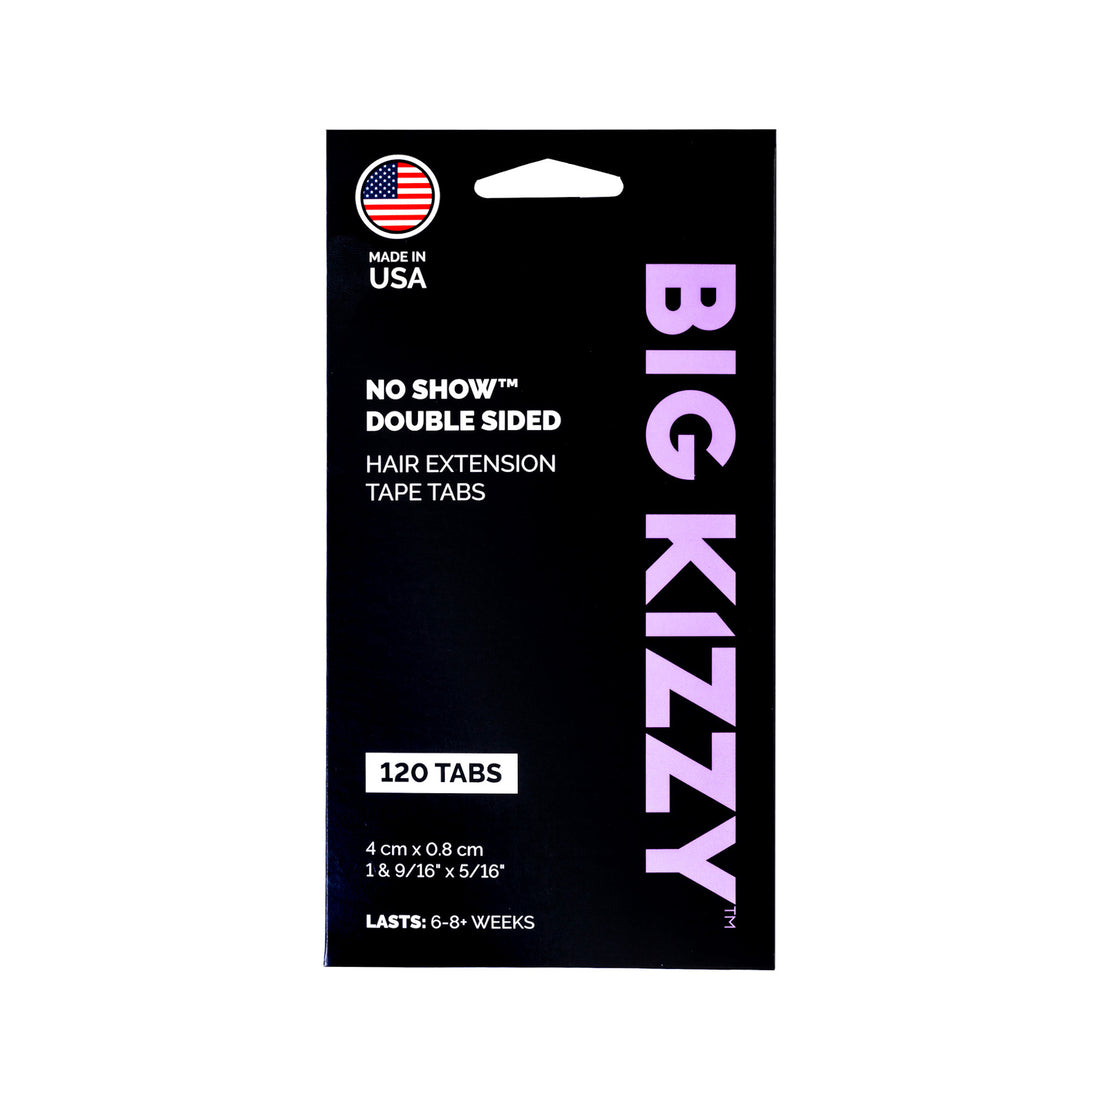 A pack of Big Kizzy® No Show Double Sided Hair Extension Replacement Tape Tabs, 120 Tabs 